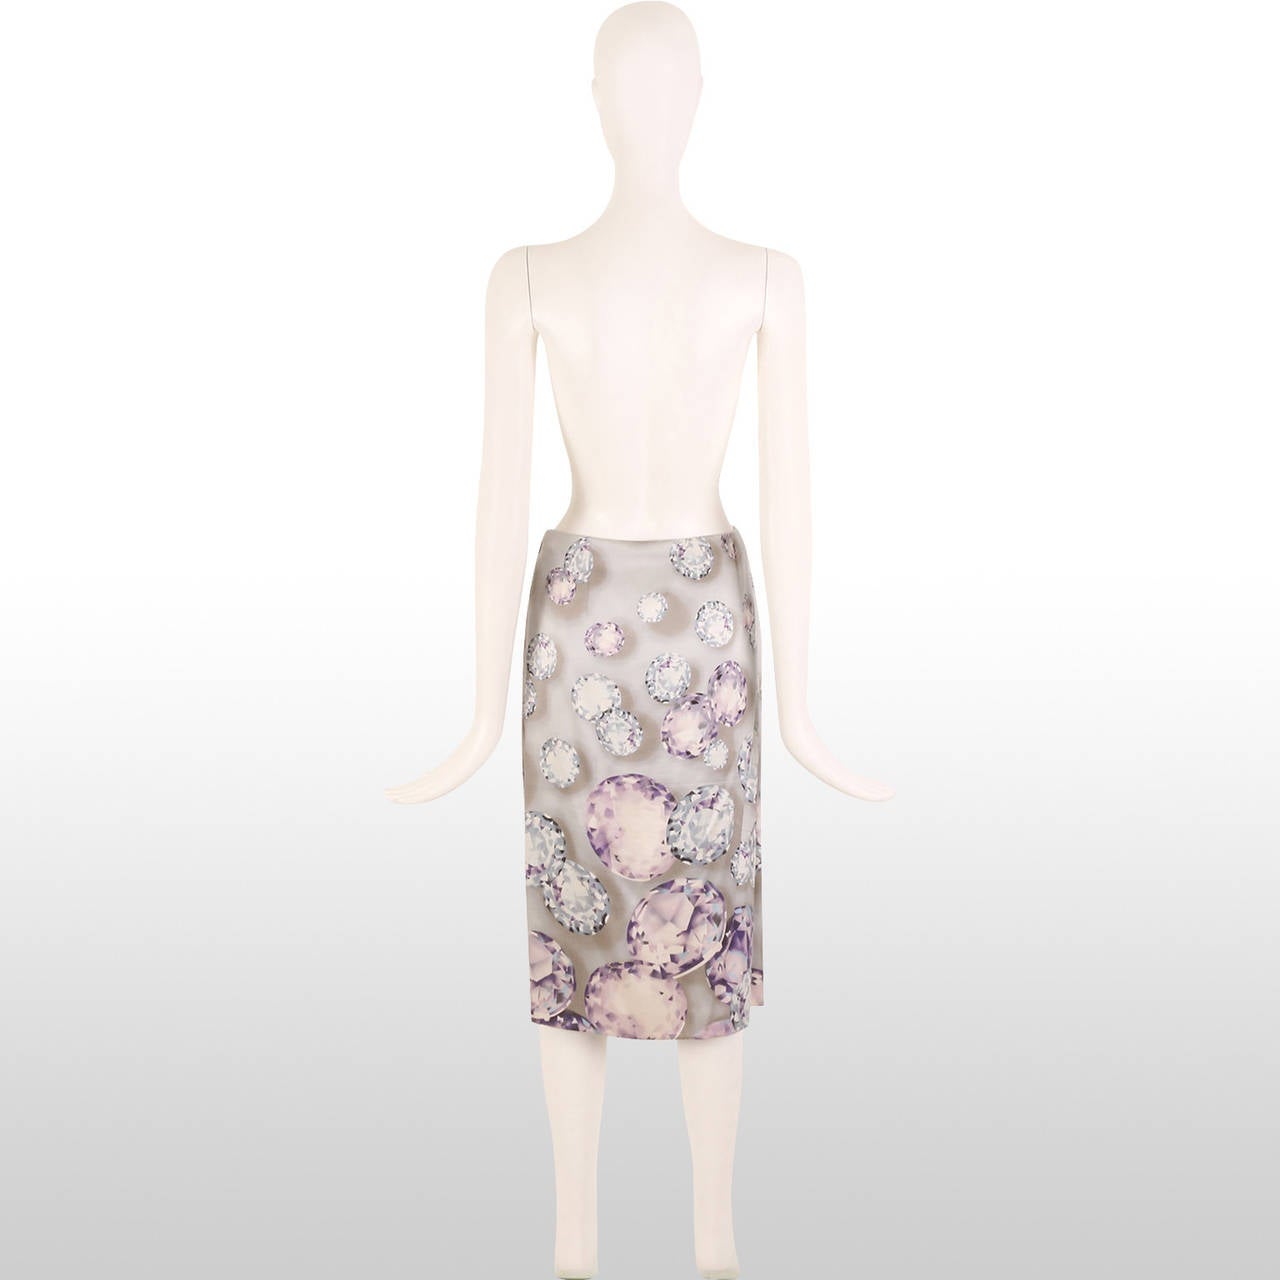 Gianni Versace Gem Print Skirt In Excellent Condition For Sale In London, GB